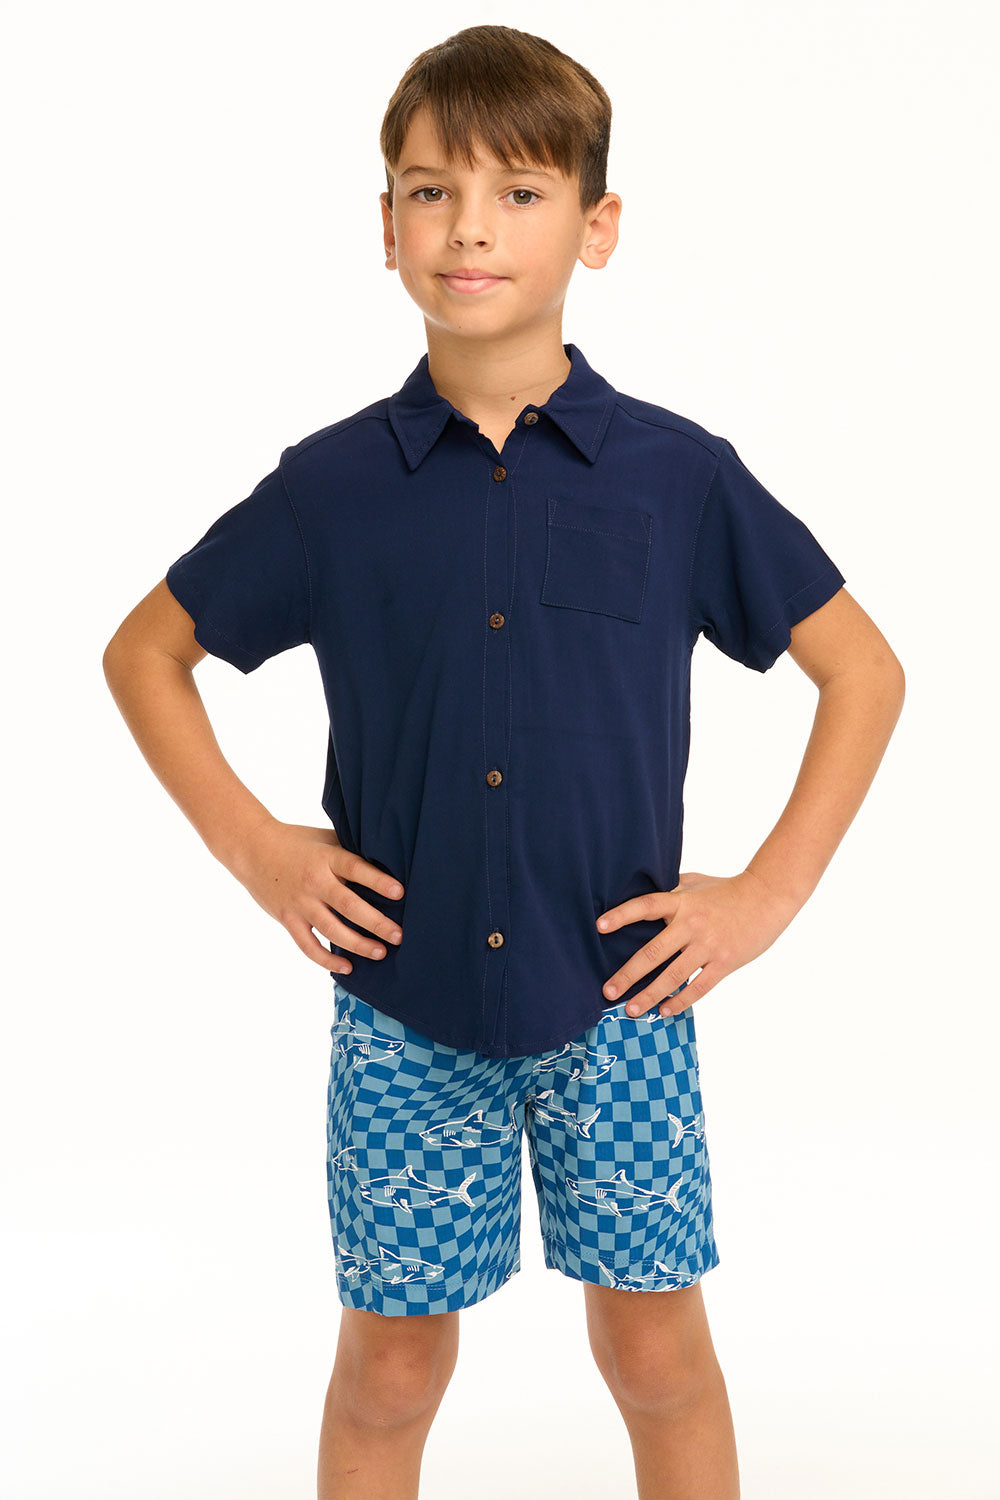 Boy's Avalon Collared Button Down Shirt BOYS chaserbrand